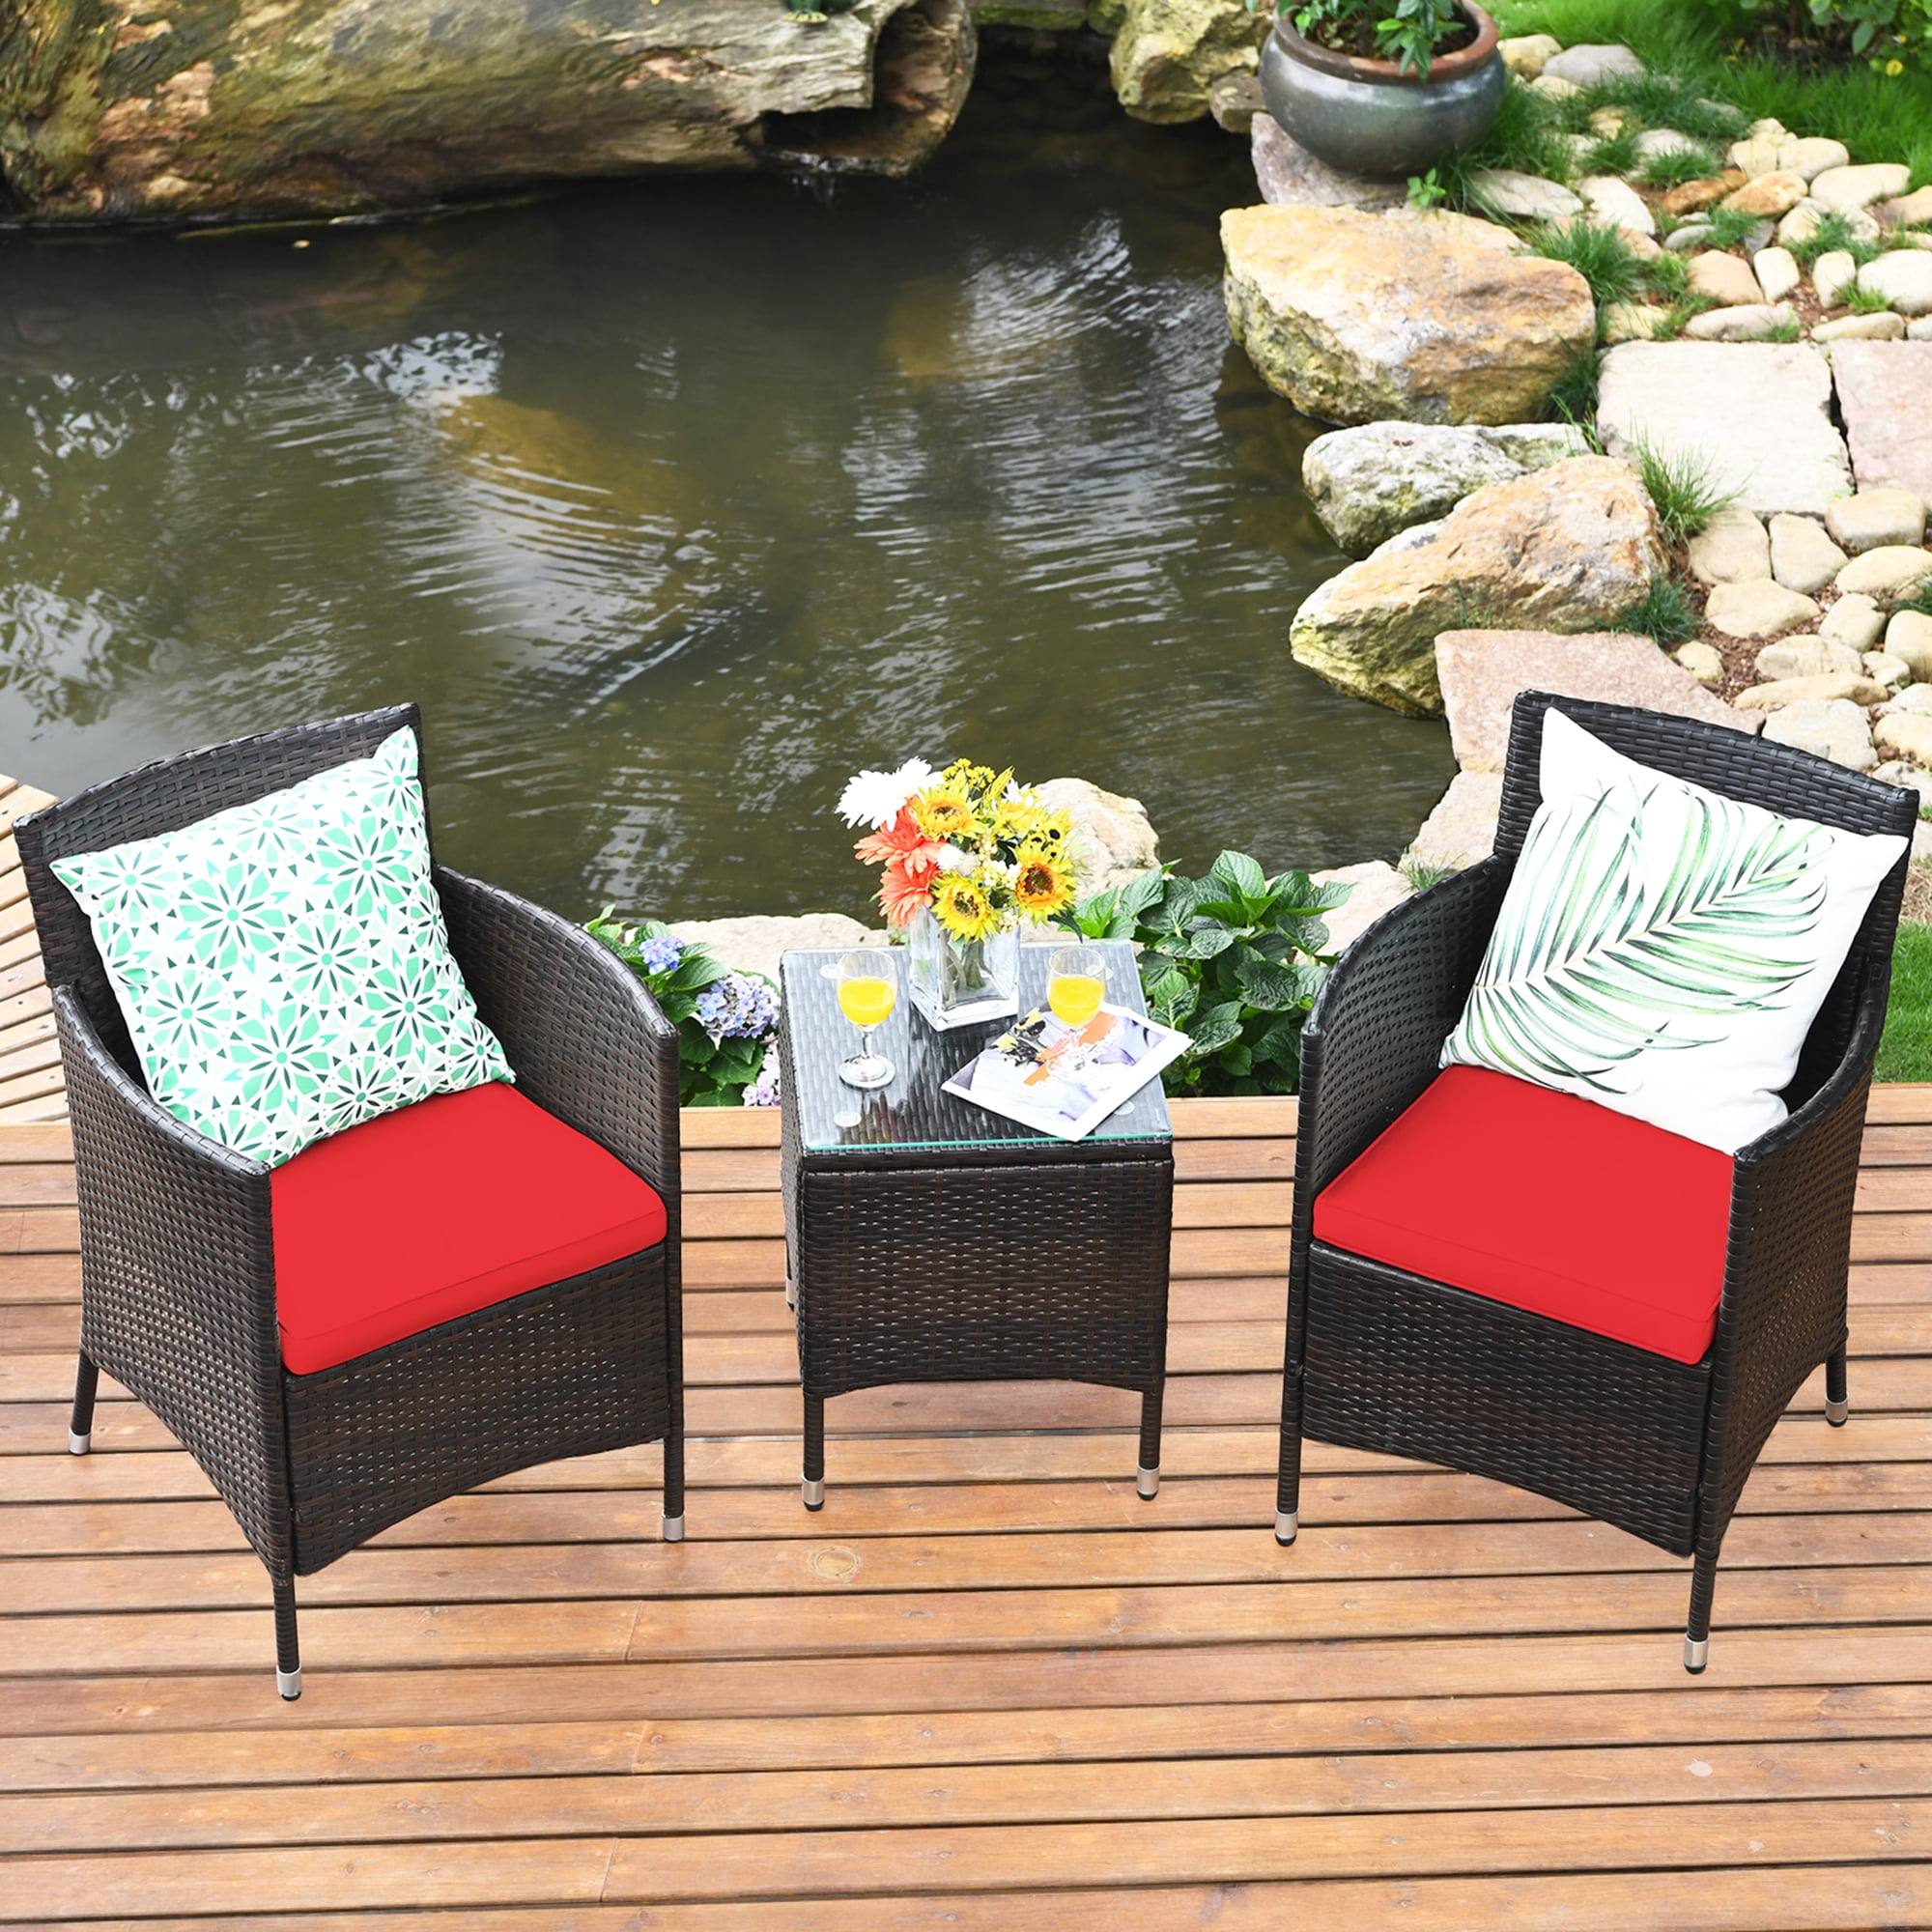 Patio Outdoor Rattan Furniture Set, Jcpenney Outdoor Patio Furniture